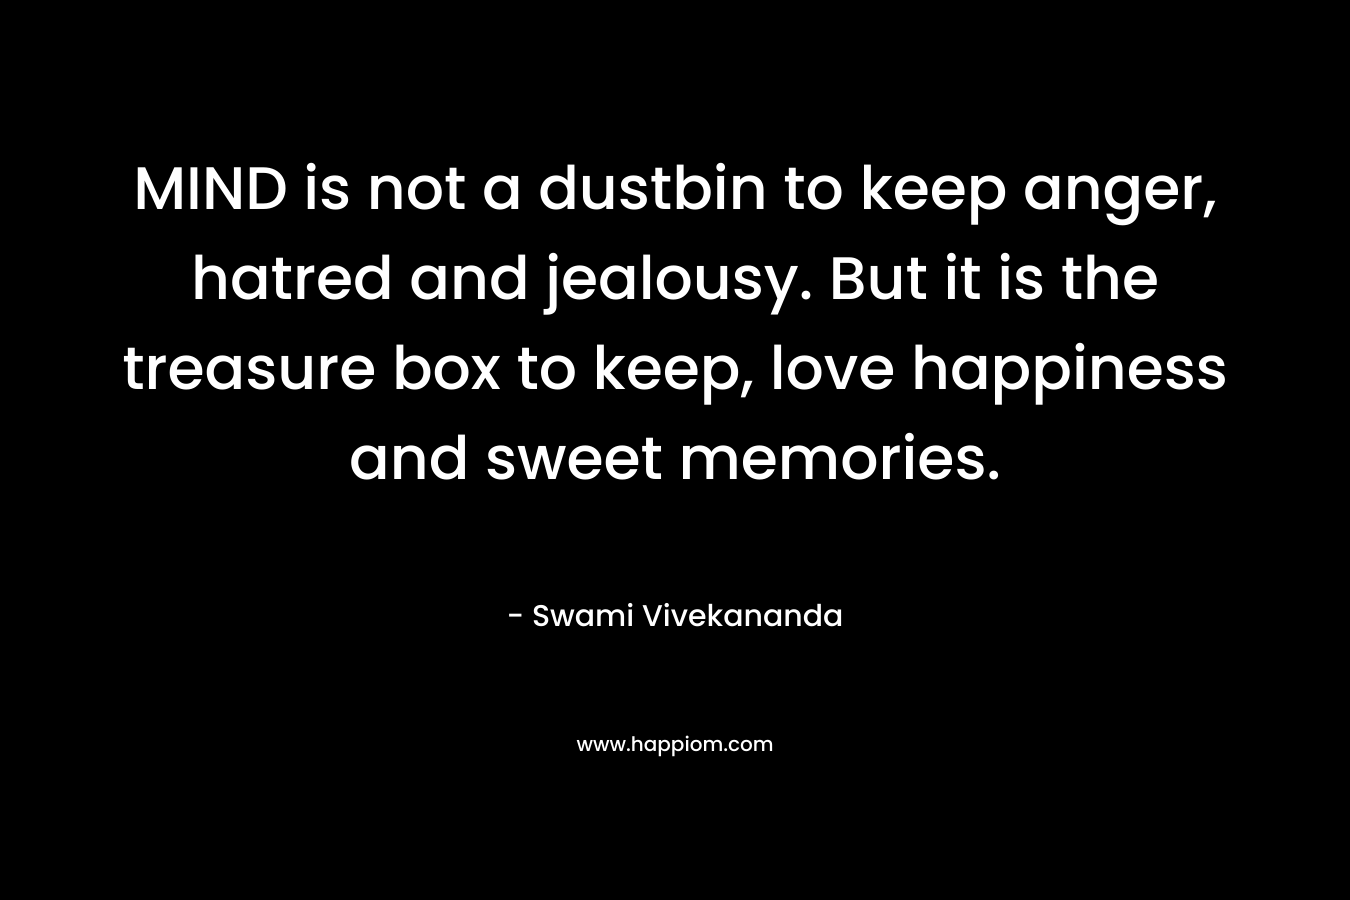 MIND is not a dustbin to keep anger, hatred and jealousy. But it is the treasure box to keep, love happiness and sweet memories.